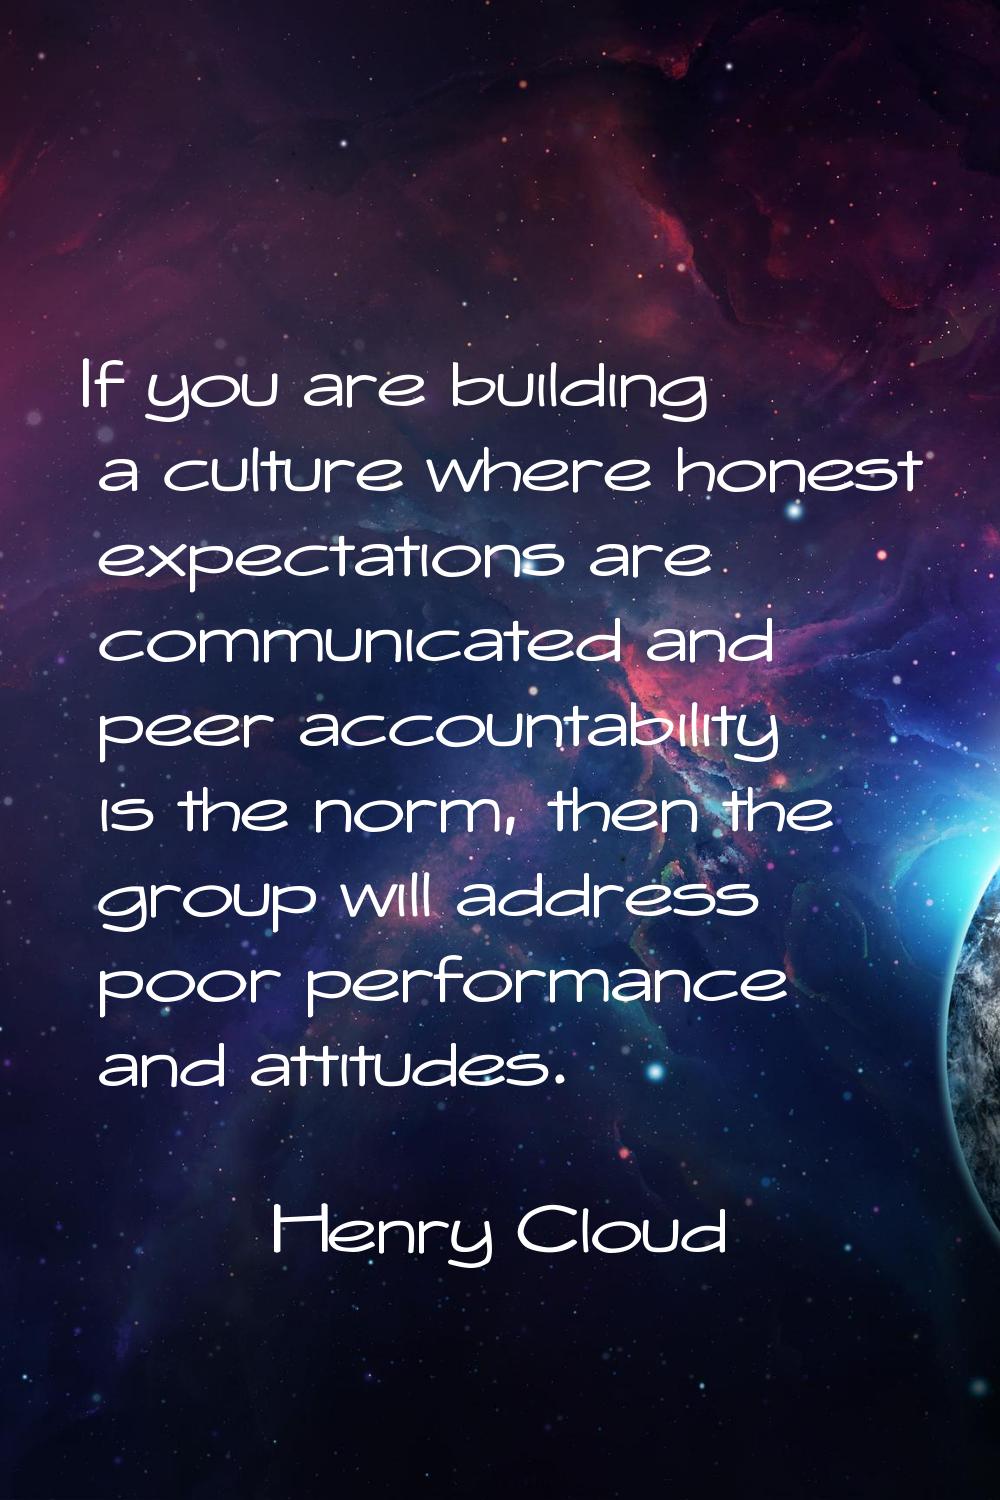 If you are building a culture where honest expectations are communicated and peer accountability is